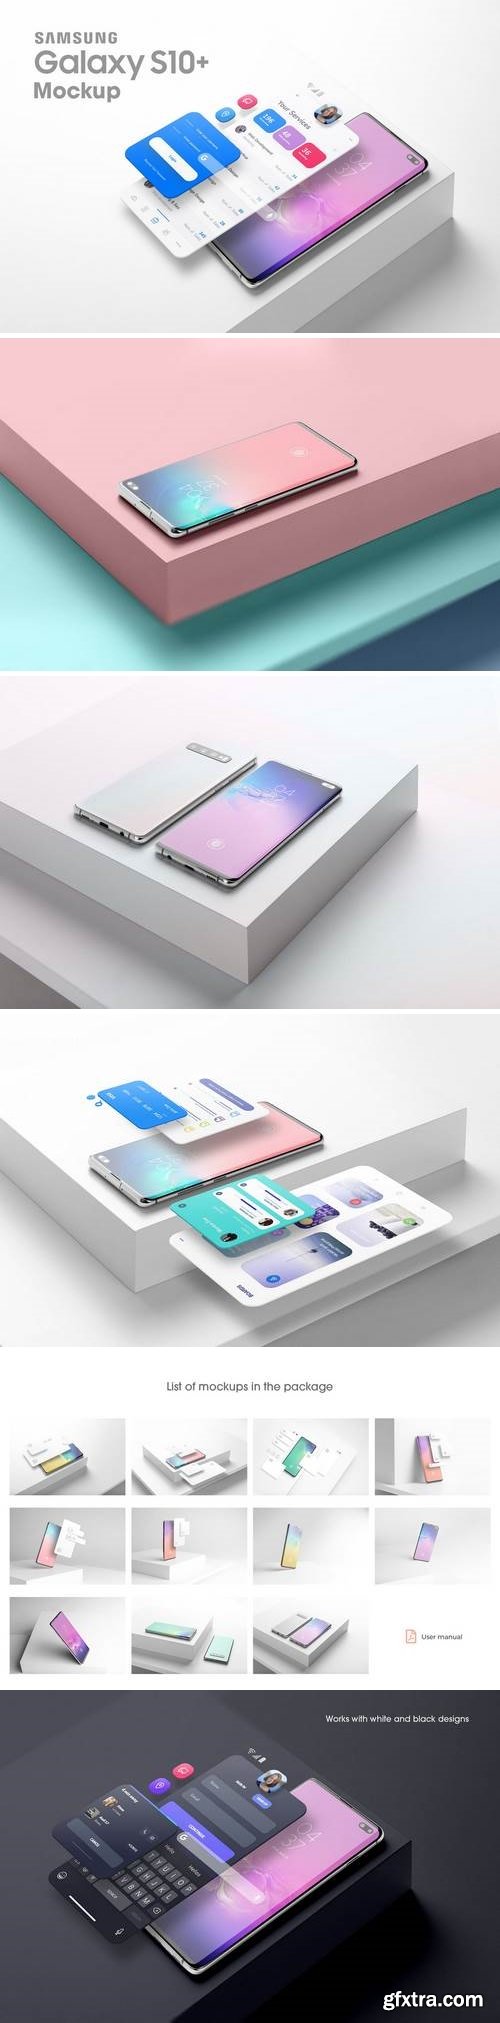 Android Smartphone Mockup